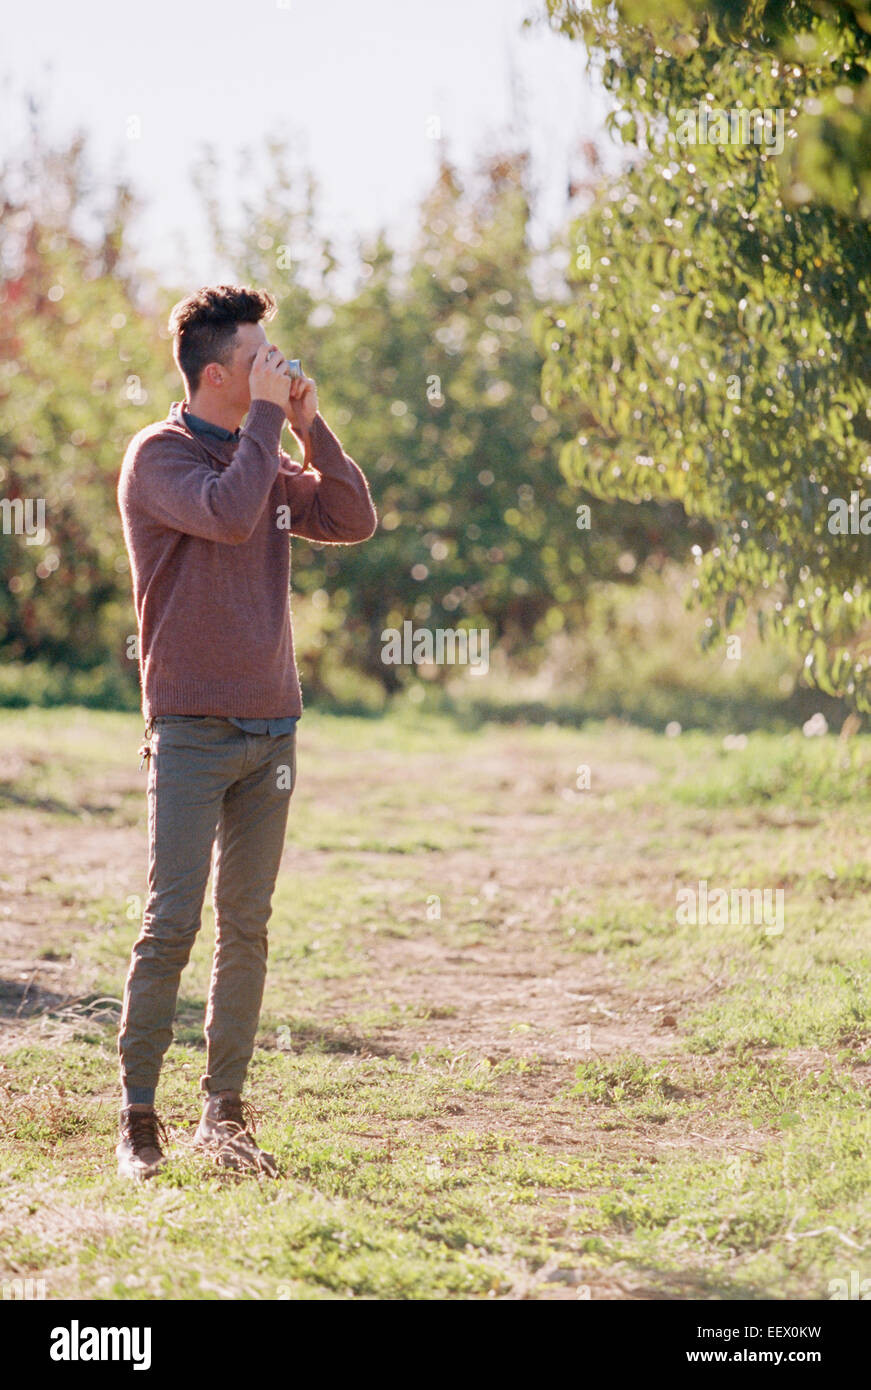 Apple orchard. Man taking a picture. Stock Photo